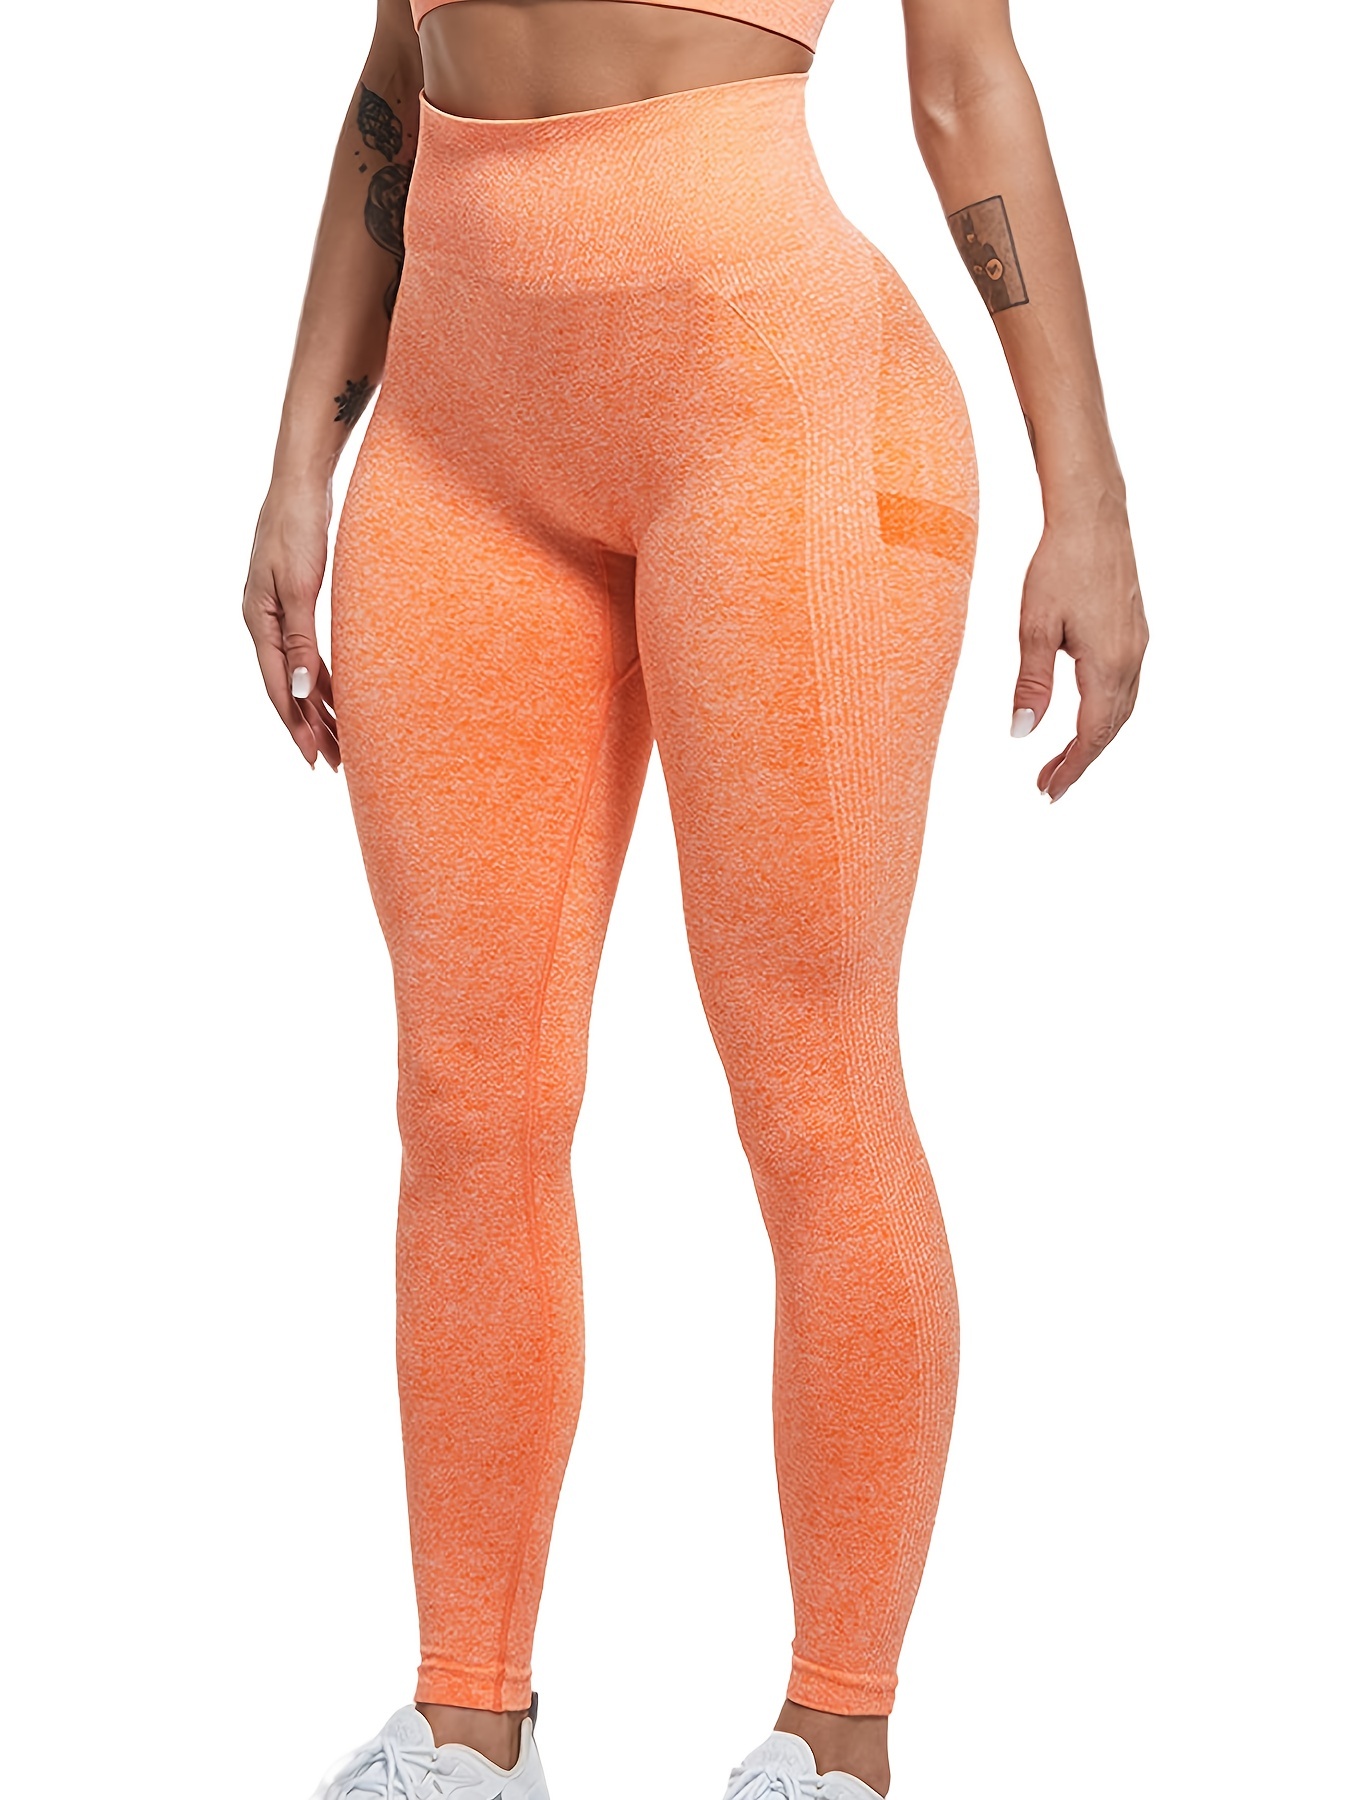 Women's Orange Butt Lifting Workout Yoga Leggings – CLOTHES FOR